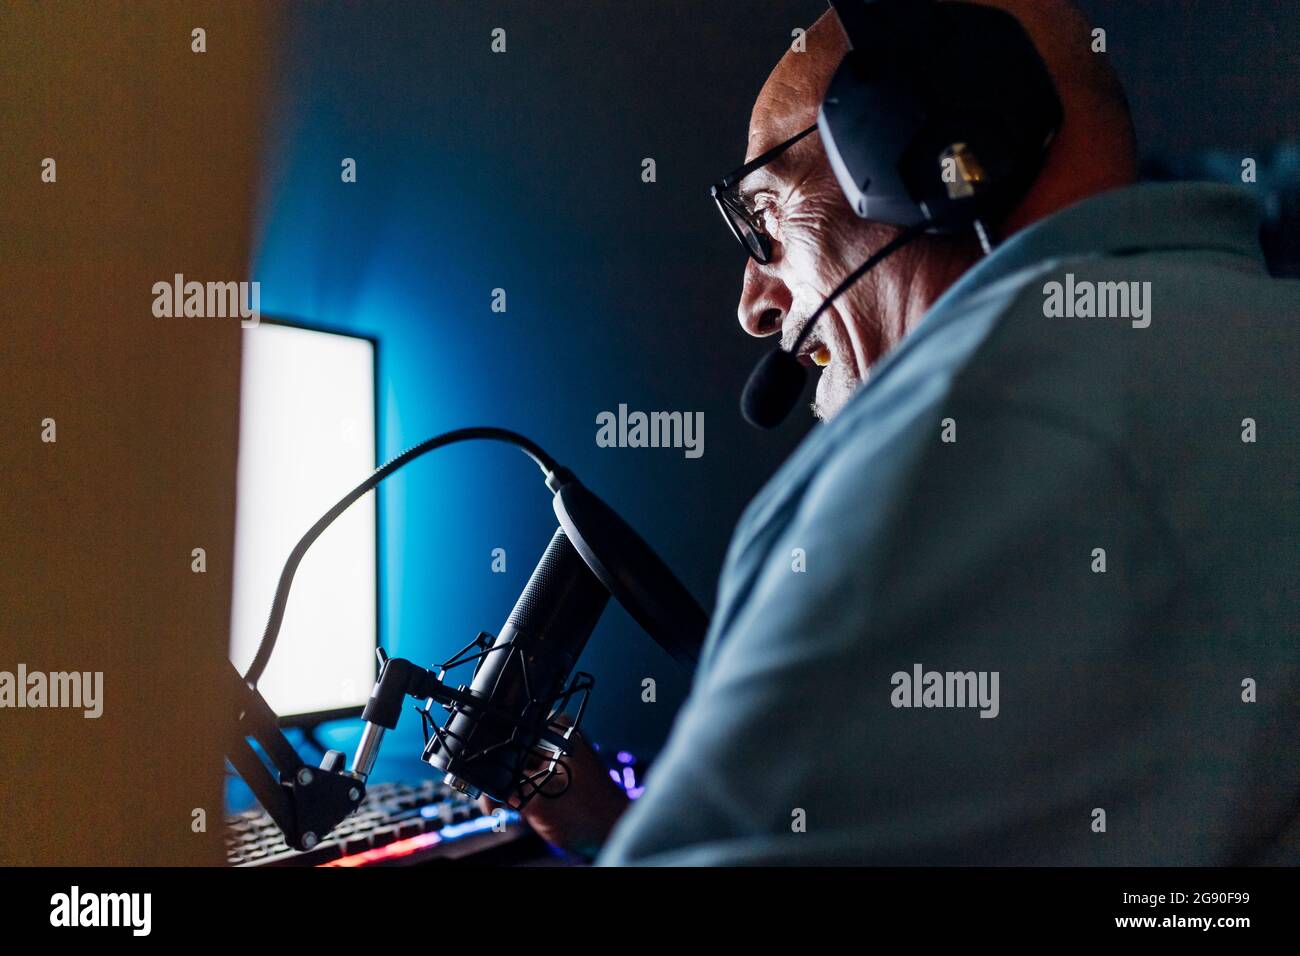 Man live streaming while using computer at home Stock Photo